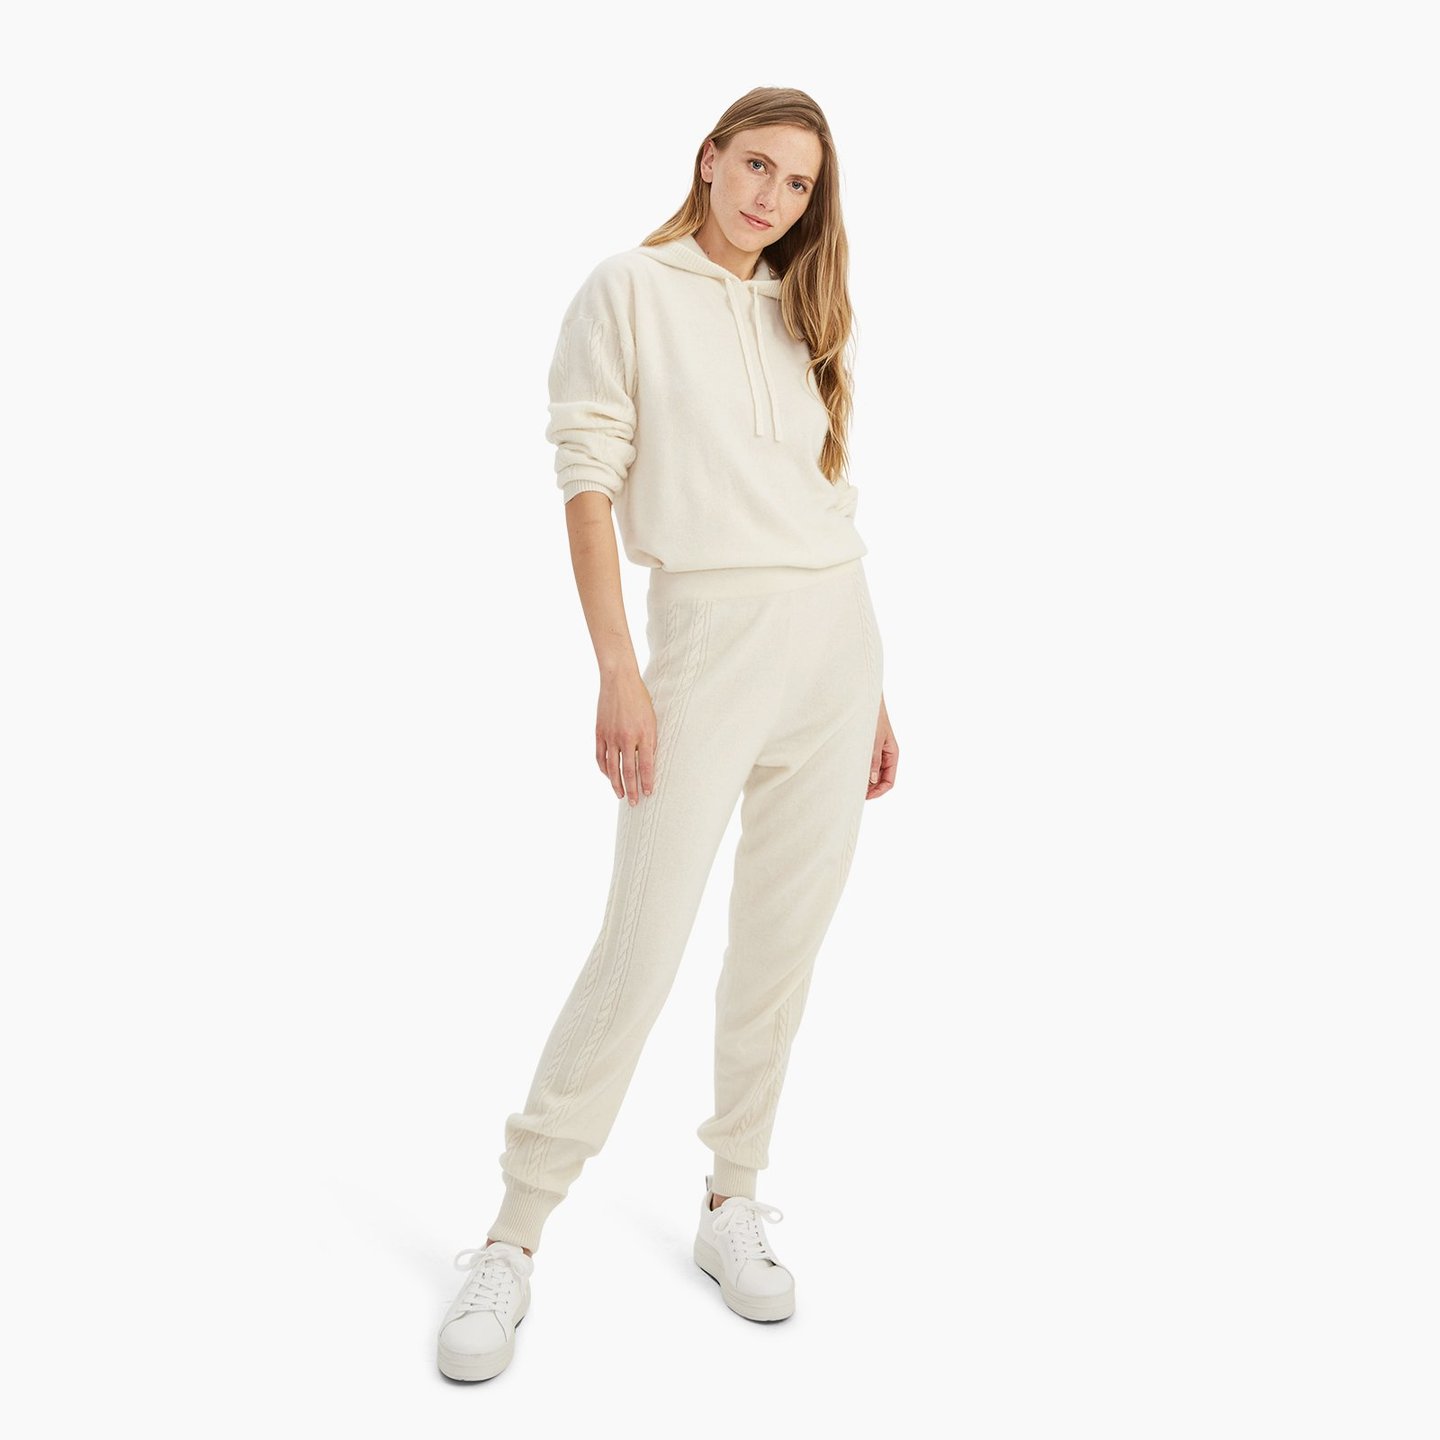 NWEB000842_Cashmere_Cable_Jogger_White_009_1440x.jpg